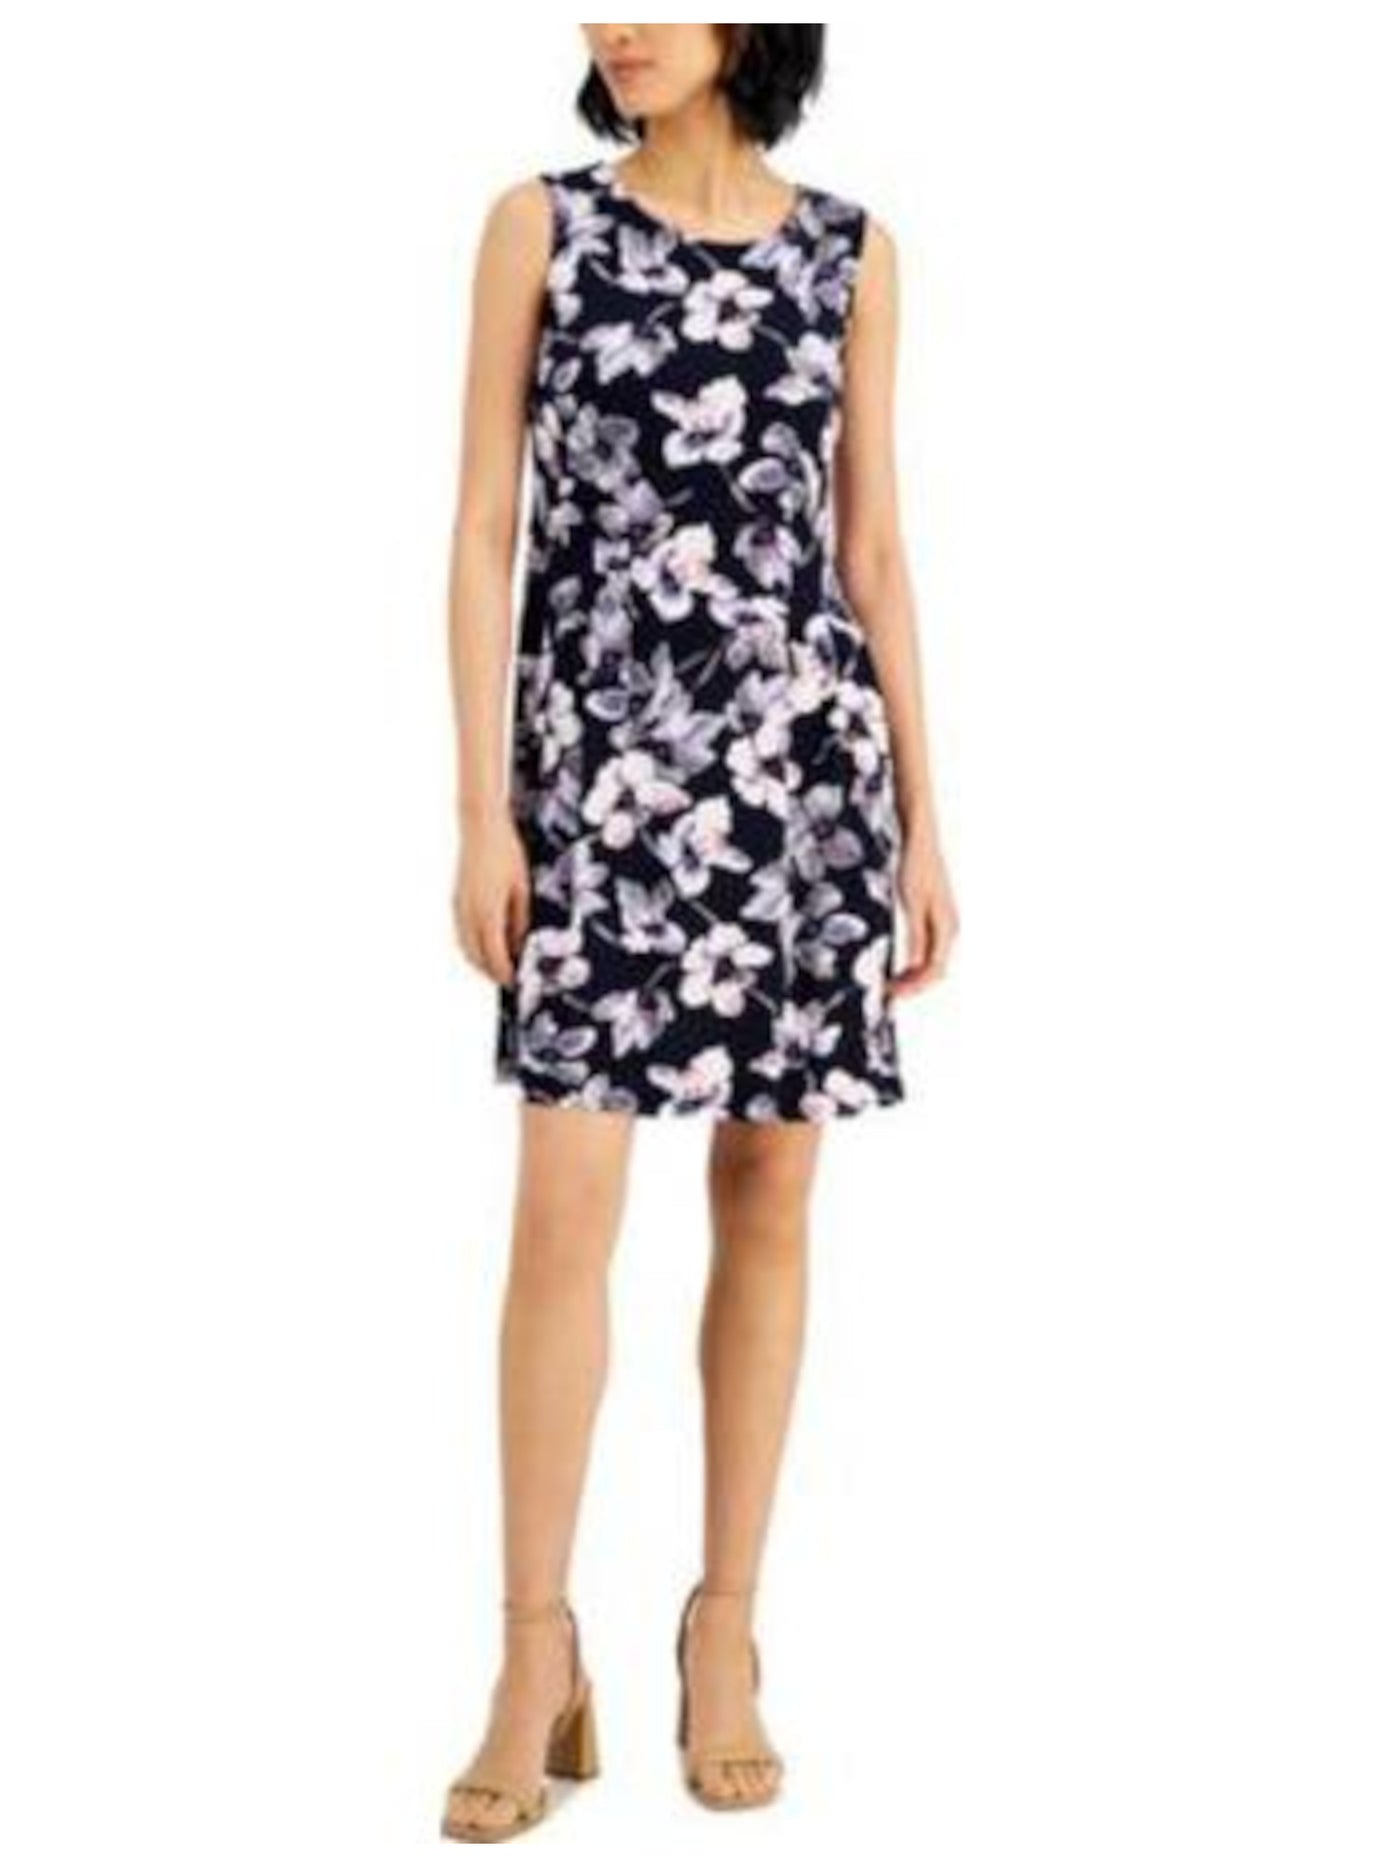 CONNECTED APPAREL Womens Navy Jersey Pleated Lined Hidden Zipper Slit Pockets Floral Sleeveless Round Neck Above The Knee Evening Fit + Flare Dress 6